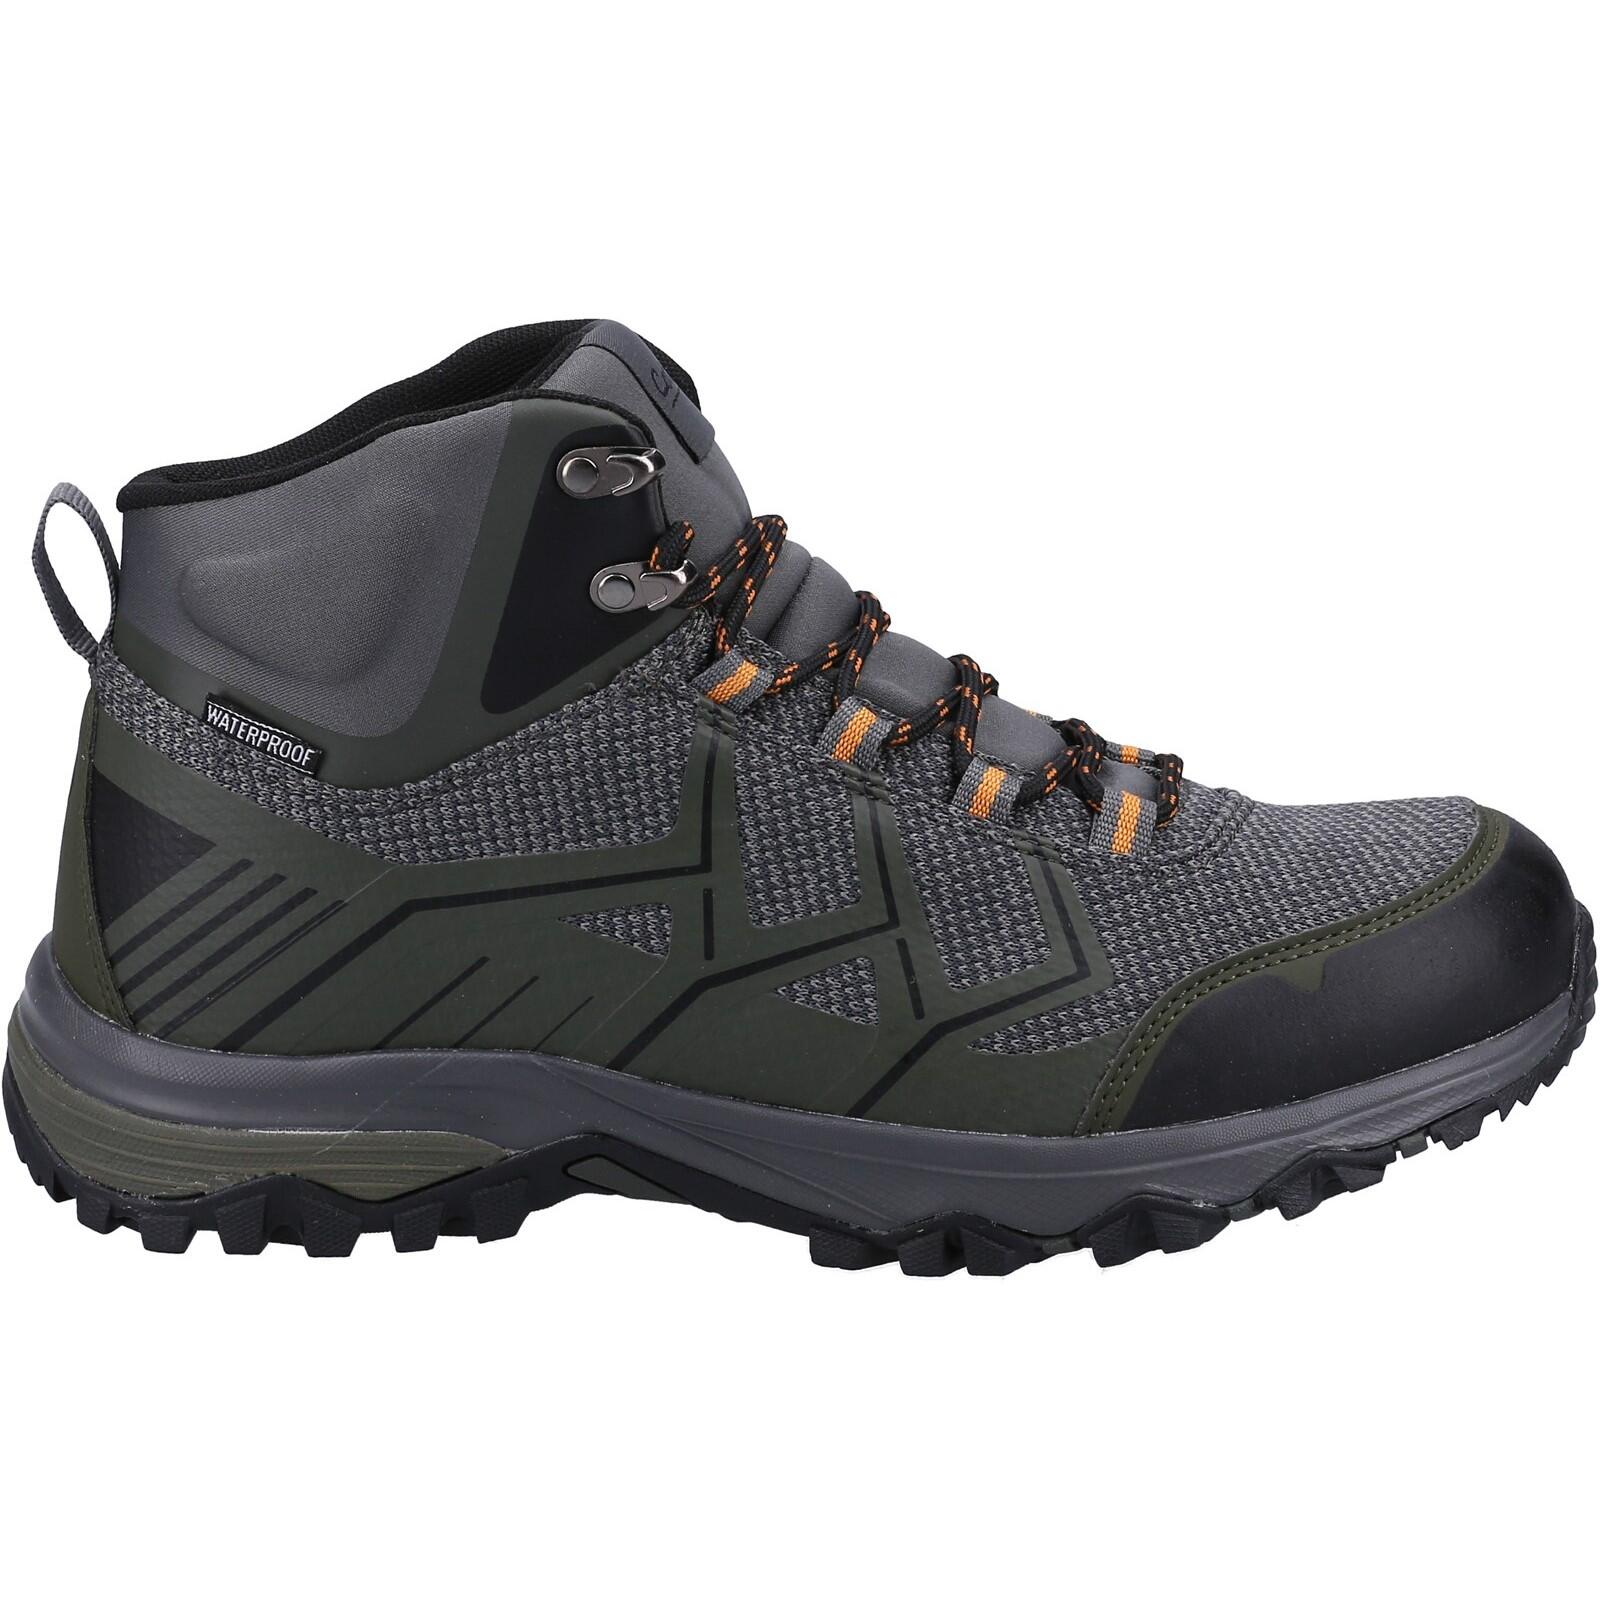 COTSWOLD WYCHWOOD RECYCLED HIKING BOOTS